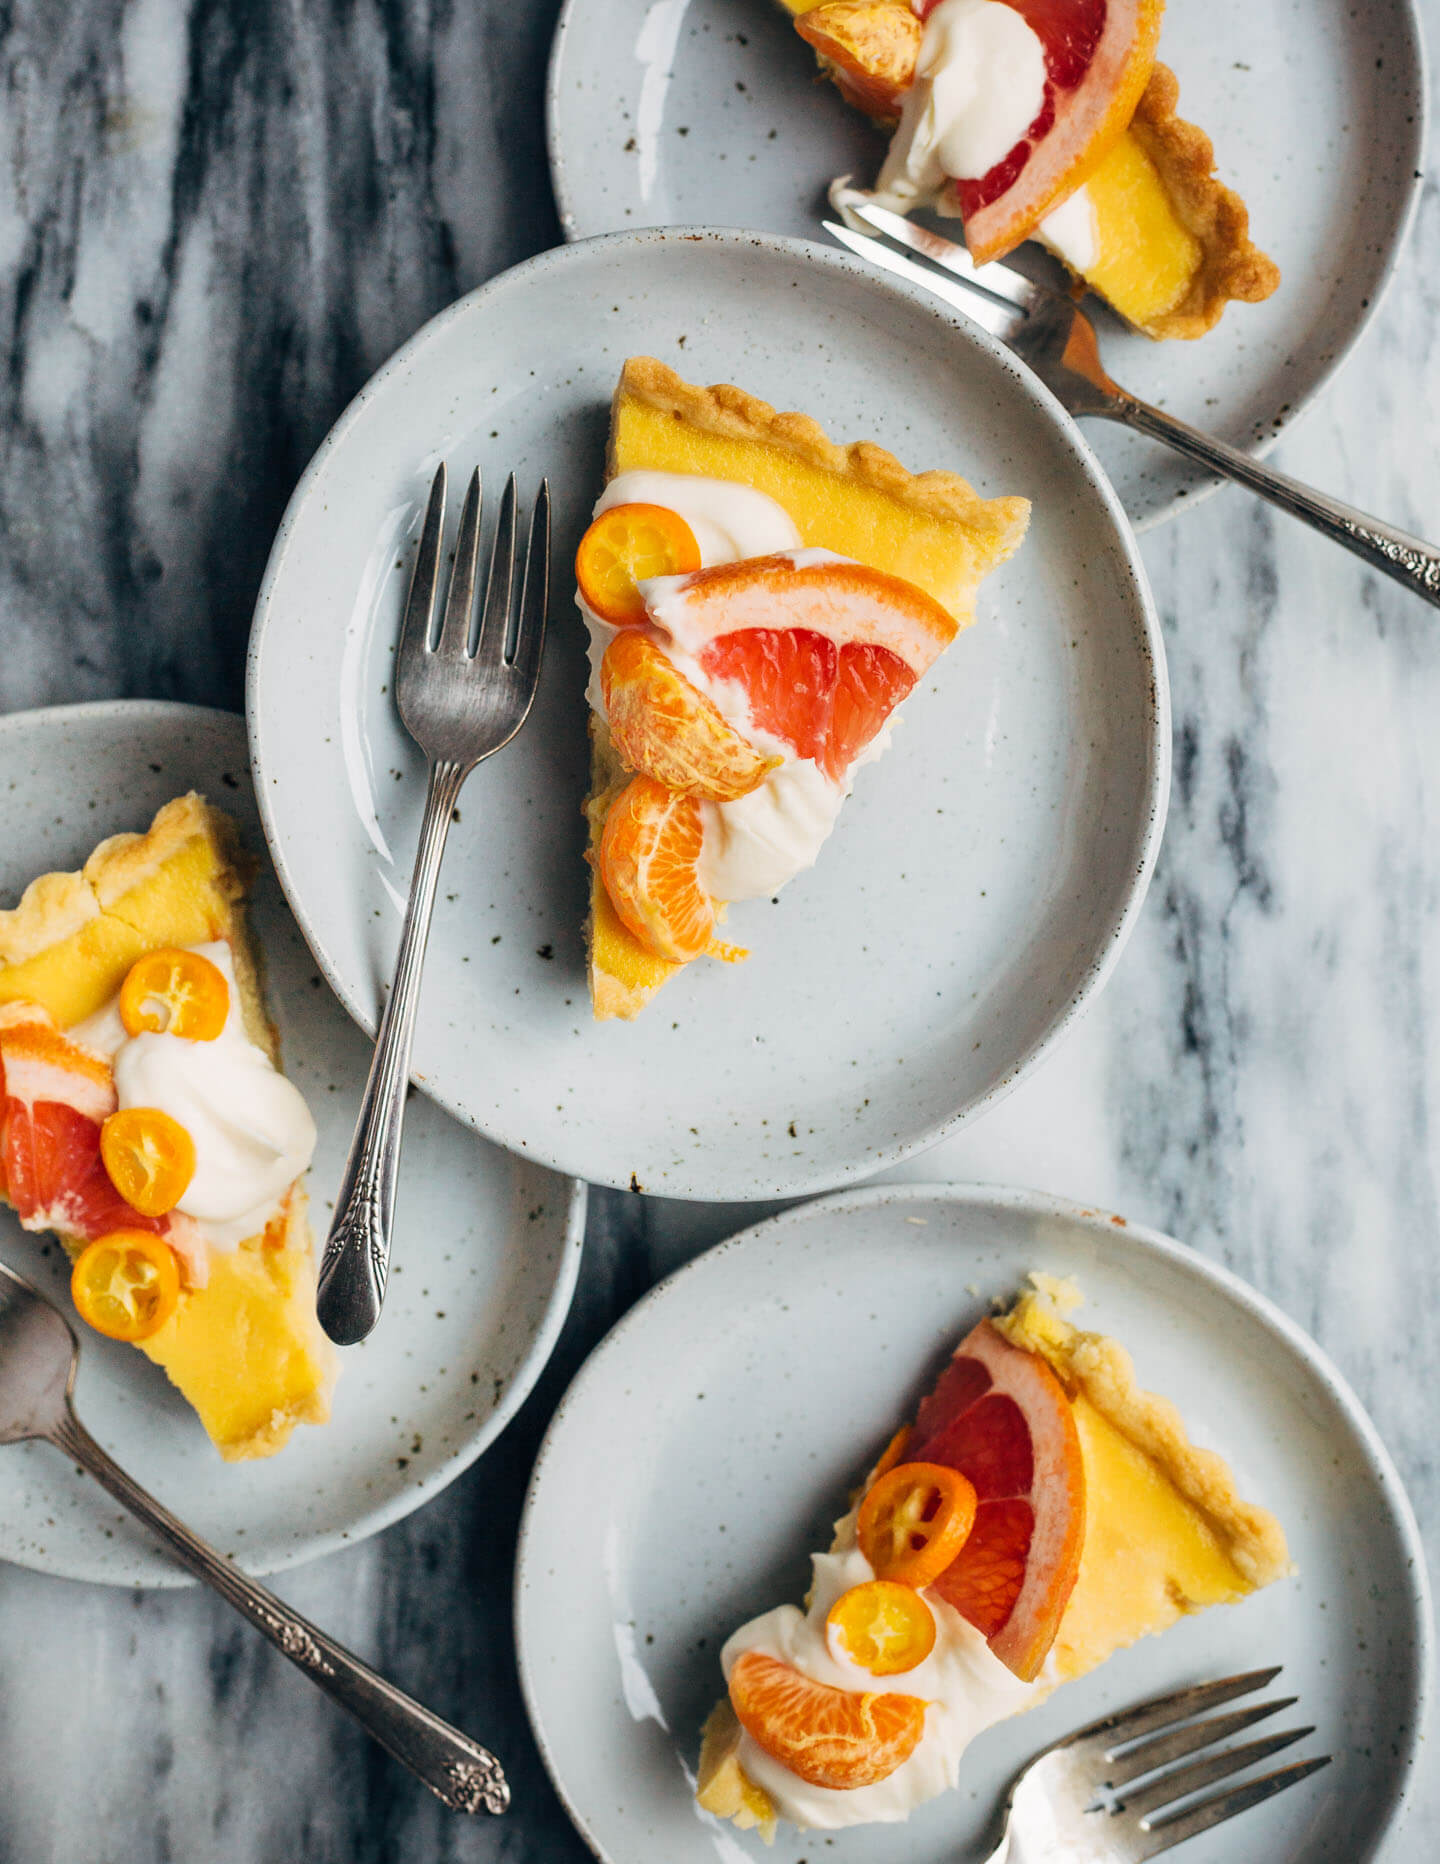 A bright and creamy grapefruit curd tart baked up in a classic pâte sucrée crust that's perfect for celebratory winter meals.